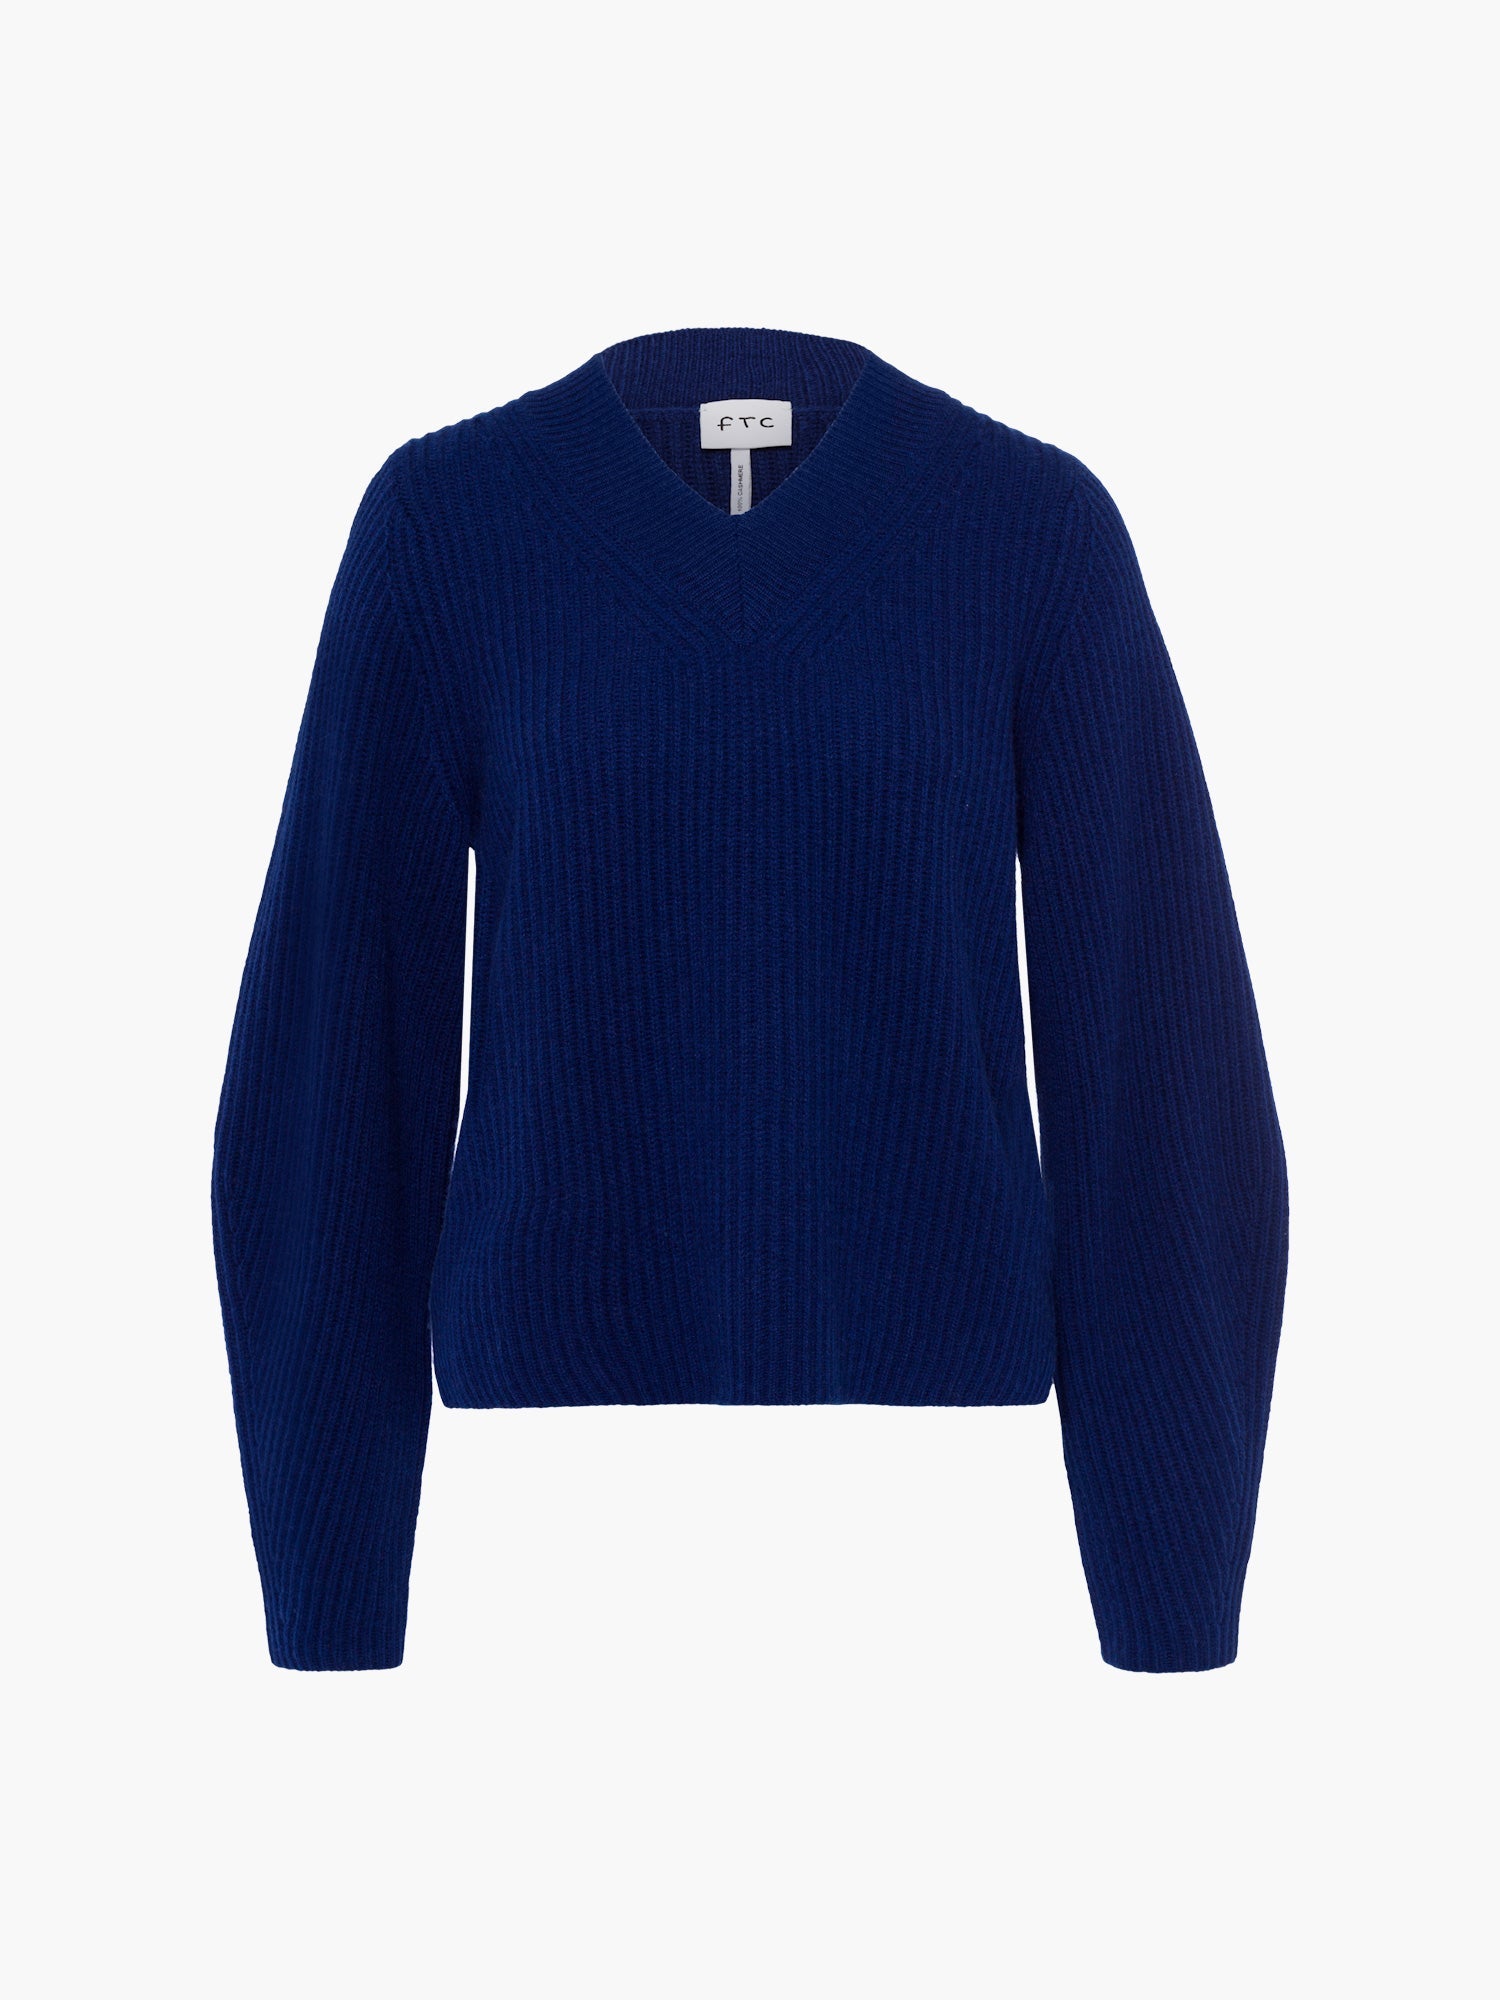 FTC-Cashmere-OUTLET-SALE-Pullover-VN-Strick-ARCHIVE-COLLECTION_a946615f-821f-49b8-821a-cacb076e9f76.jpg